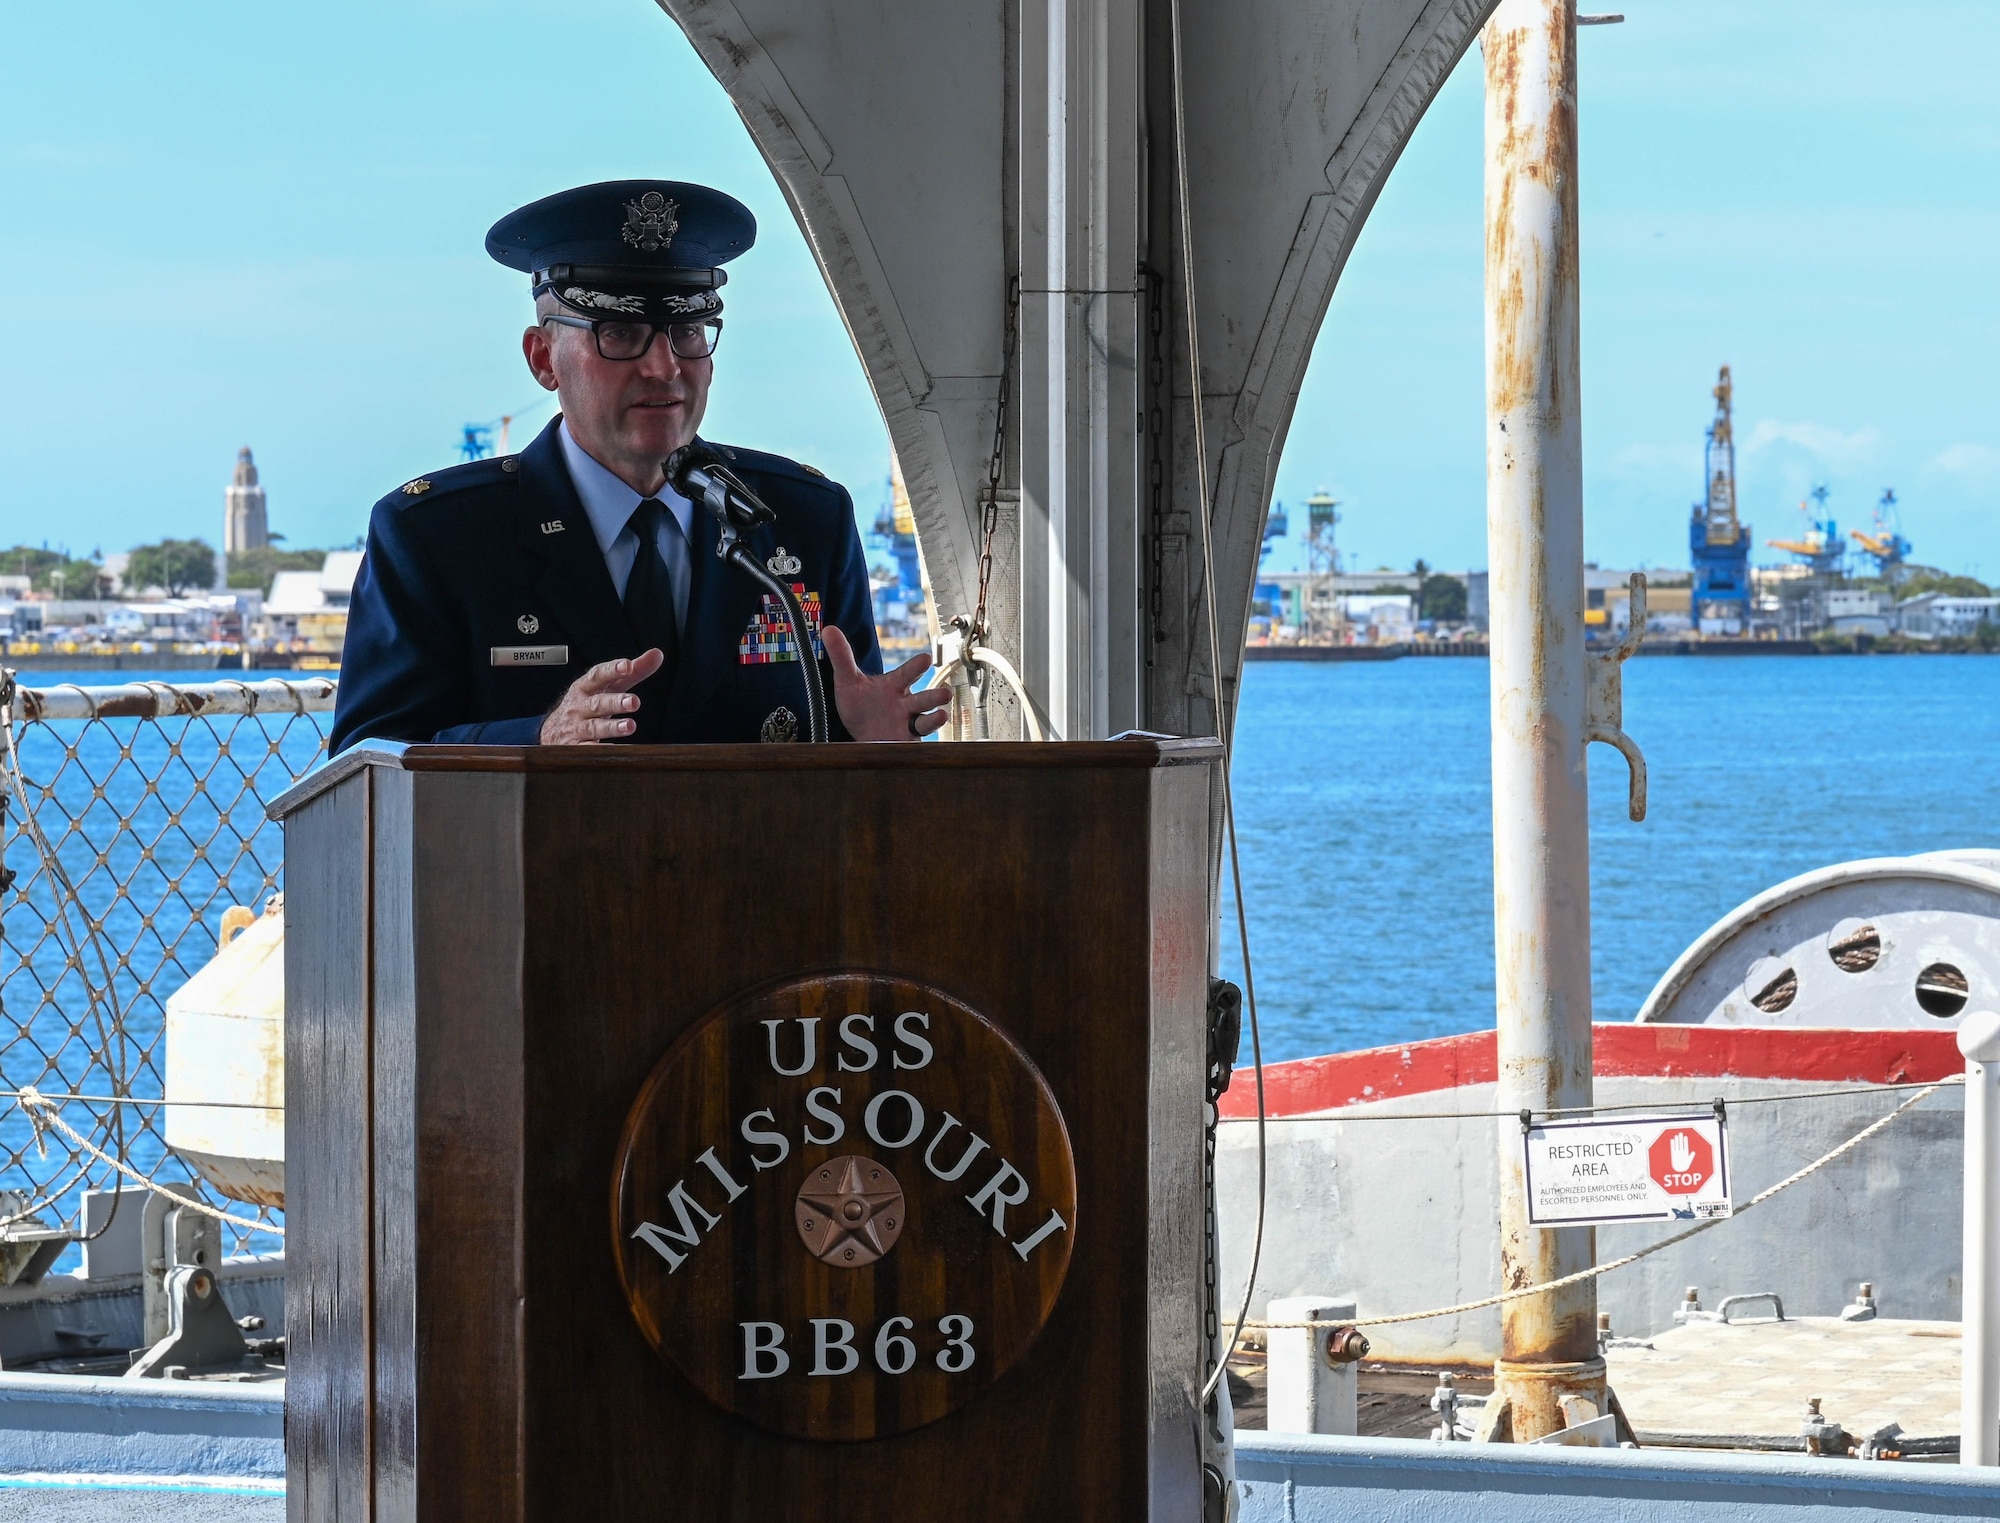 Maj. Michael J. Bryant addresses attendees during OSI's 6th Field Investigations Region assumption of command ceremony on board the historic battleship U.S.S. Missouri at Joint Base Pearl Harbor-Hickam, Hawaii, to standup the 13th Field Investigations Squadron, March 30, 2023. (U.S. Air Force photo by SrA Zoie Cox, 15WG/PA)